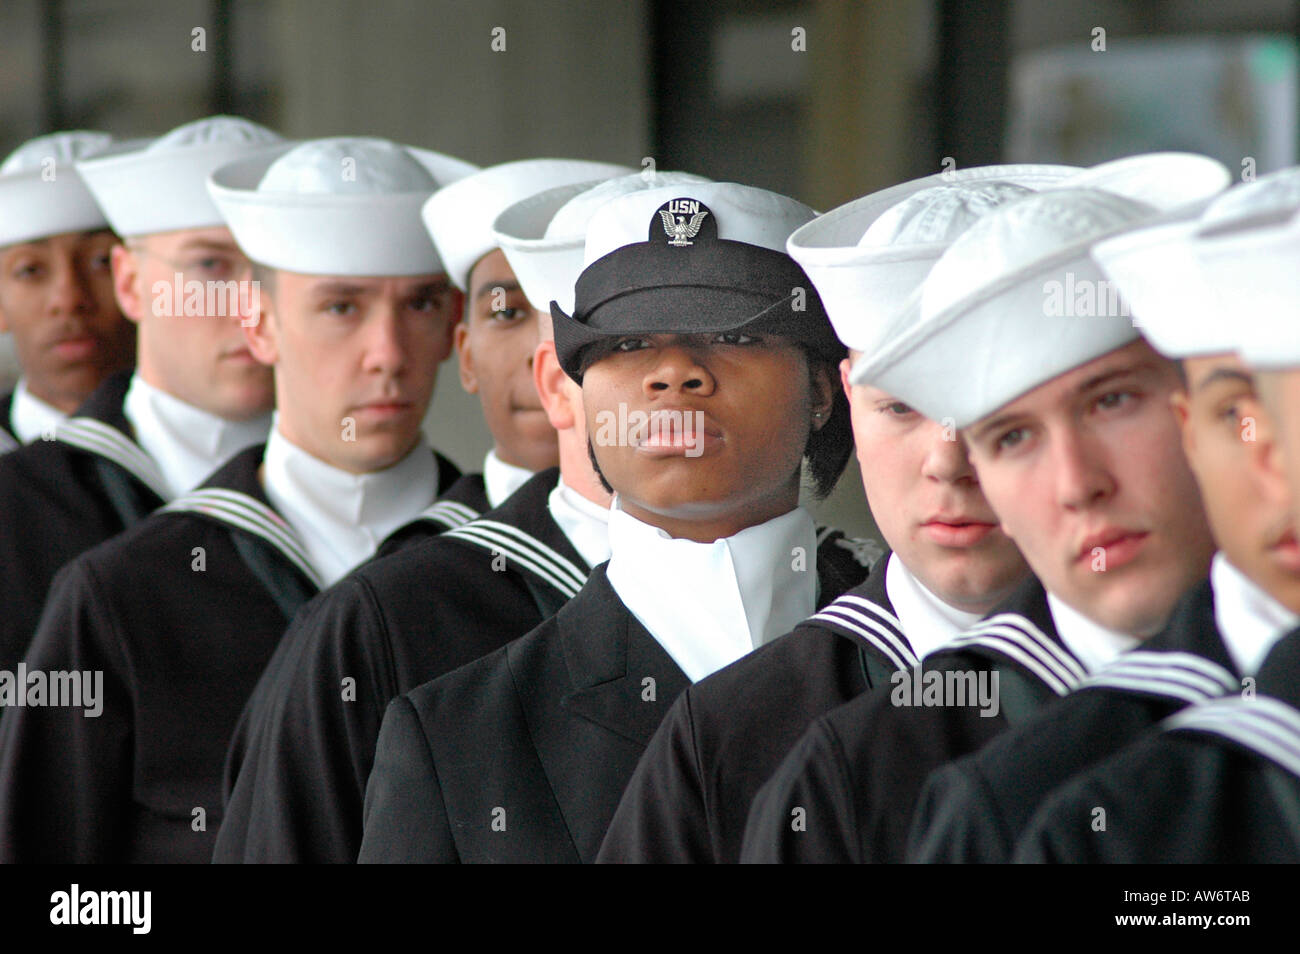 Real high school female girl Students in the real Navy Navel ROTC Military corps marching with the flags at parade in Atlanta Georgia USA America Stock Photo